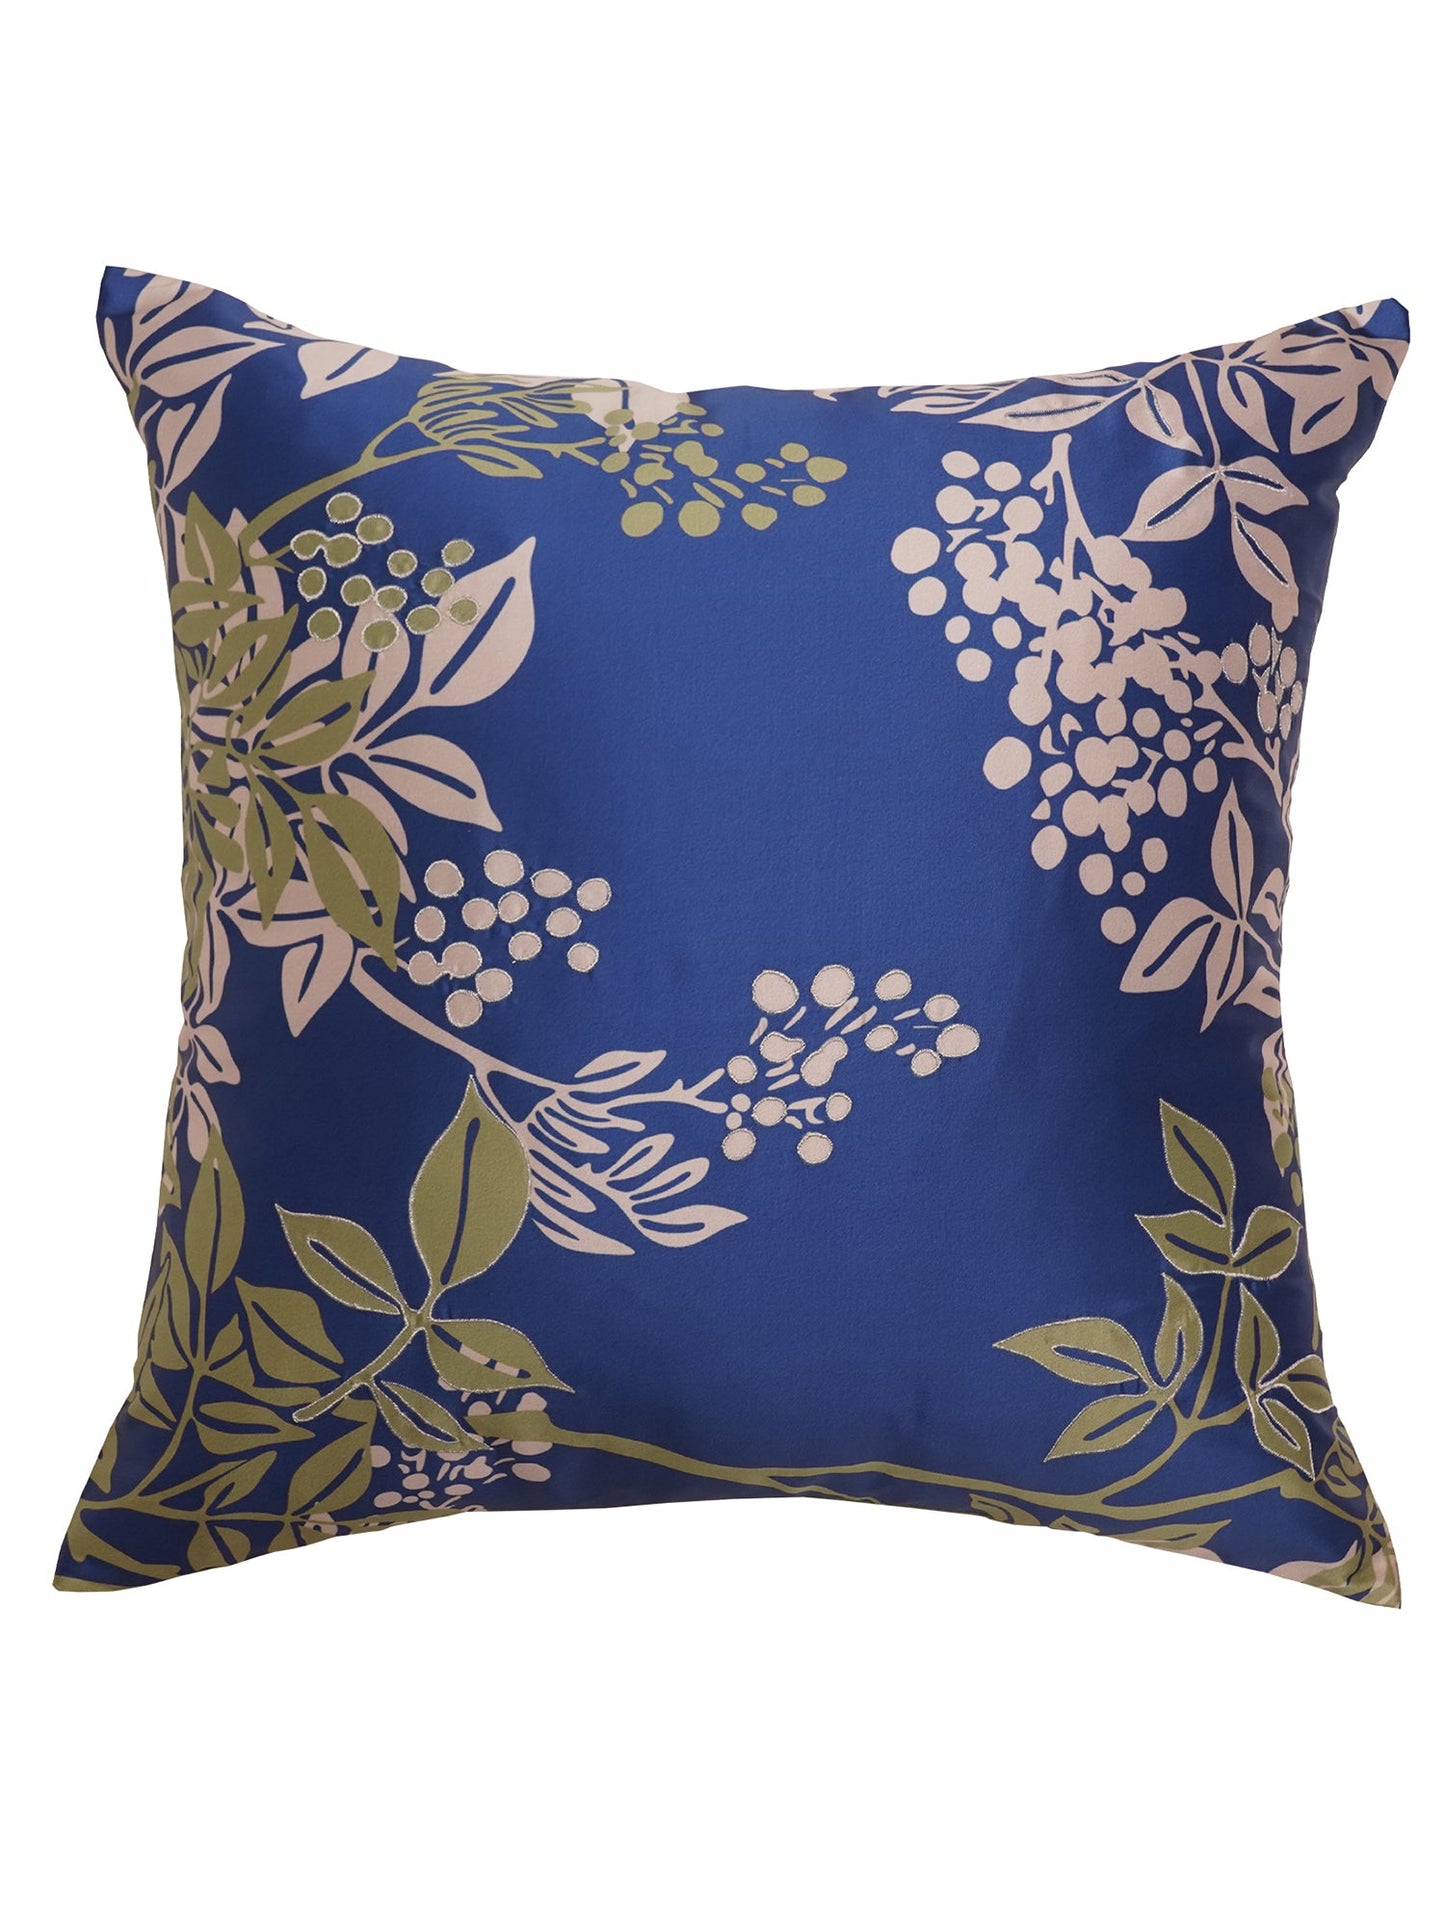 Cushion Cover Polyester Printed Blue Green - 20" X 20"